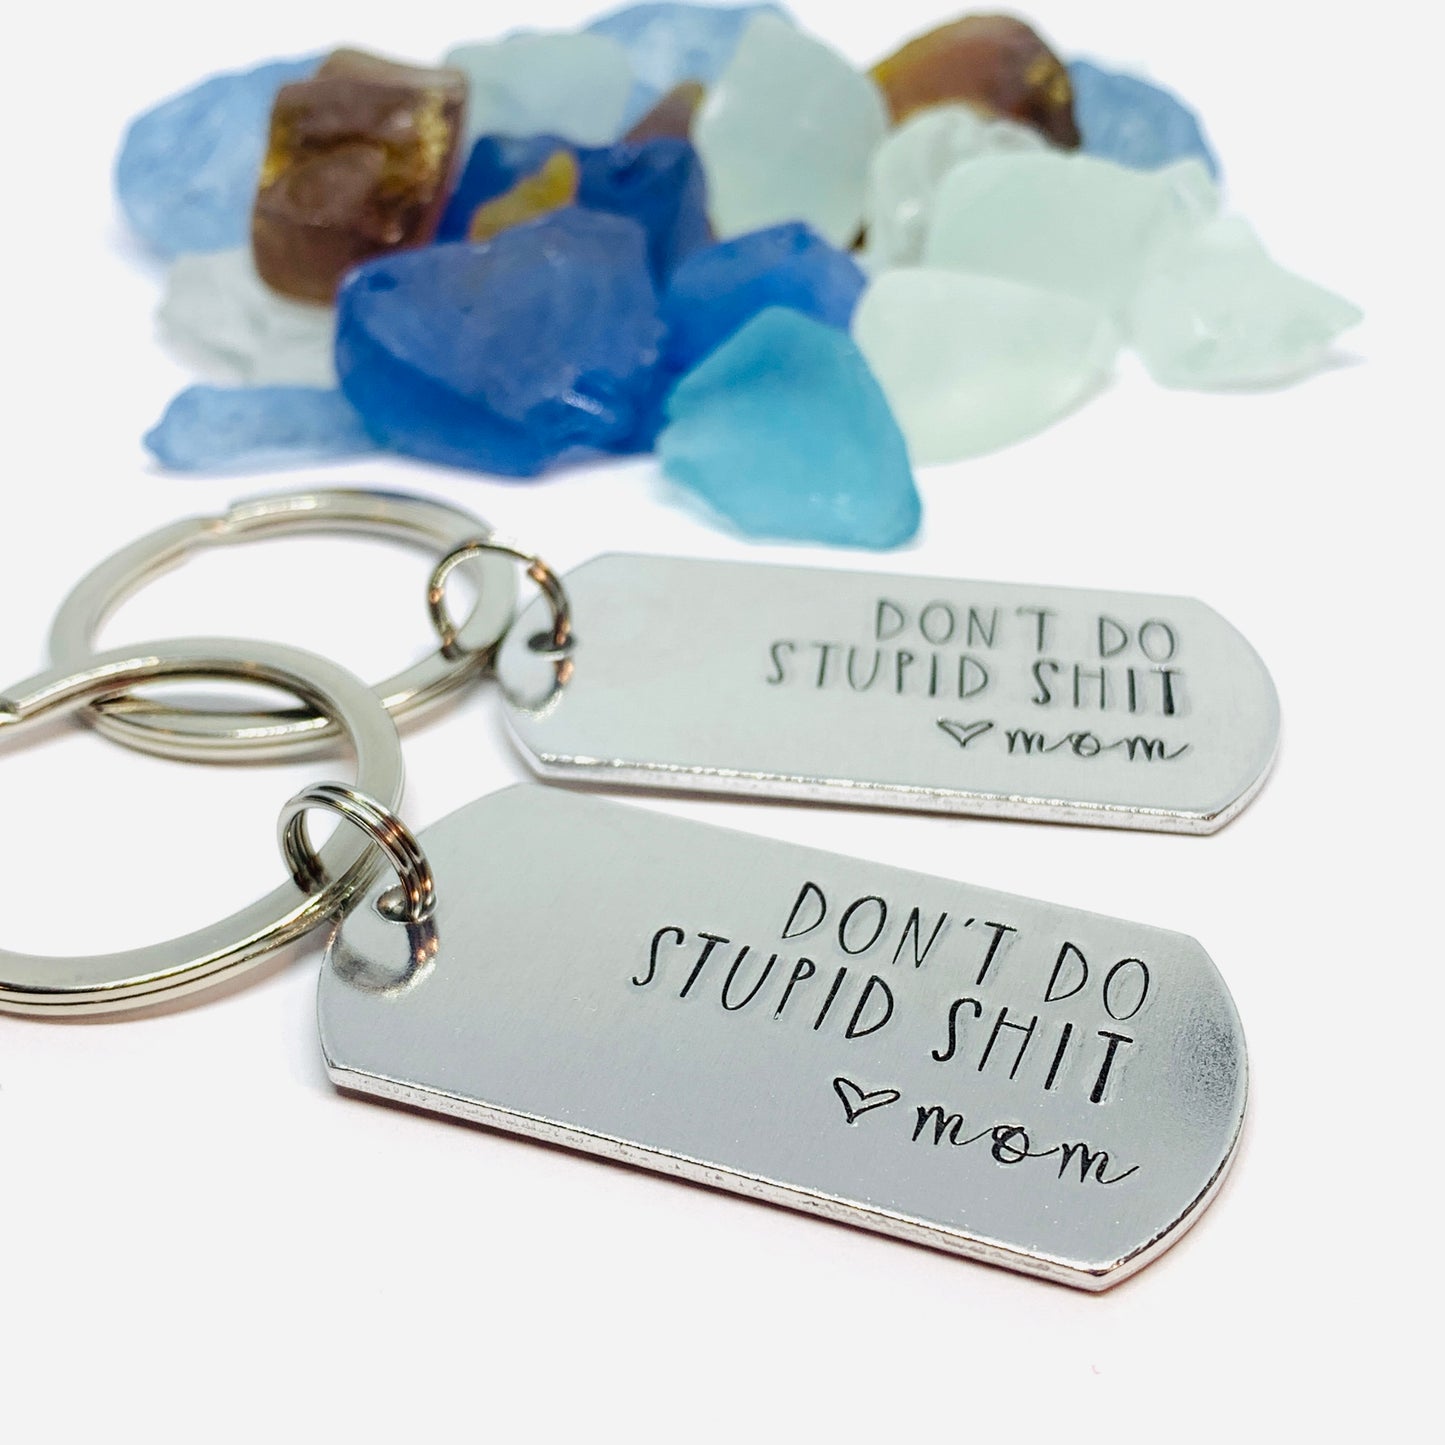 Don’t Do Stupid Shit Love Mom| Hand Stamped Metal Keyring | Drive Safe Gift from Parents | Teenager Keychain Gift | Graduate Gift Idea